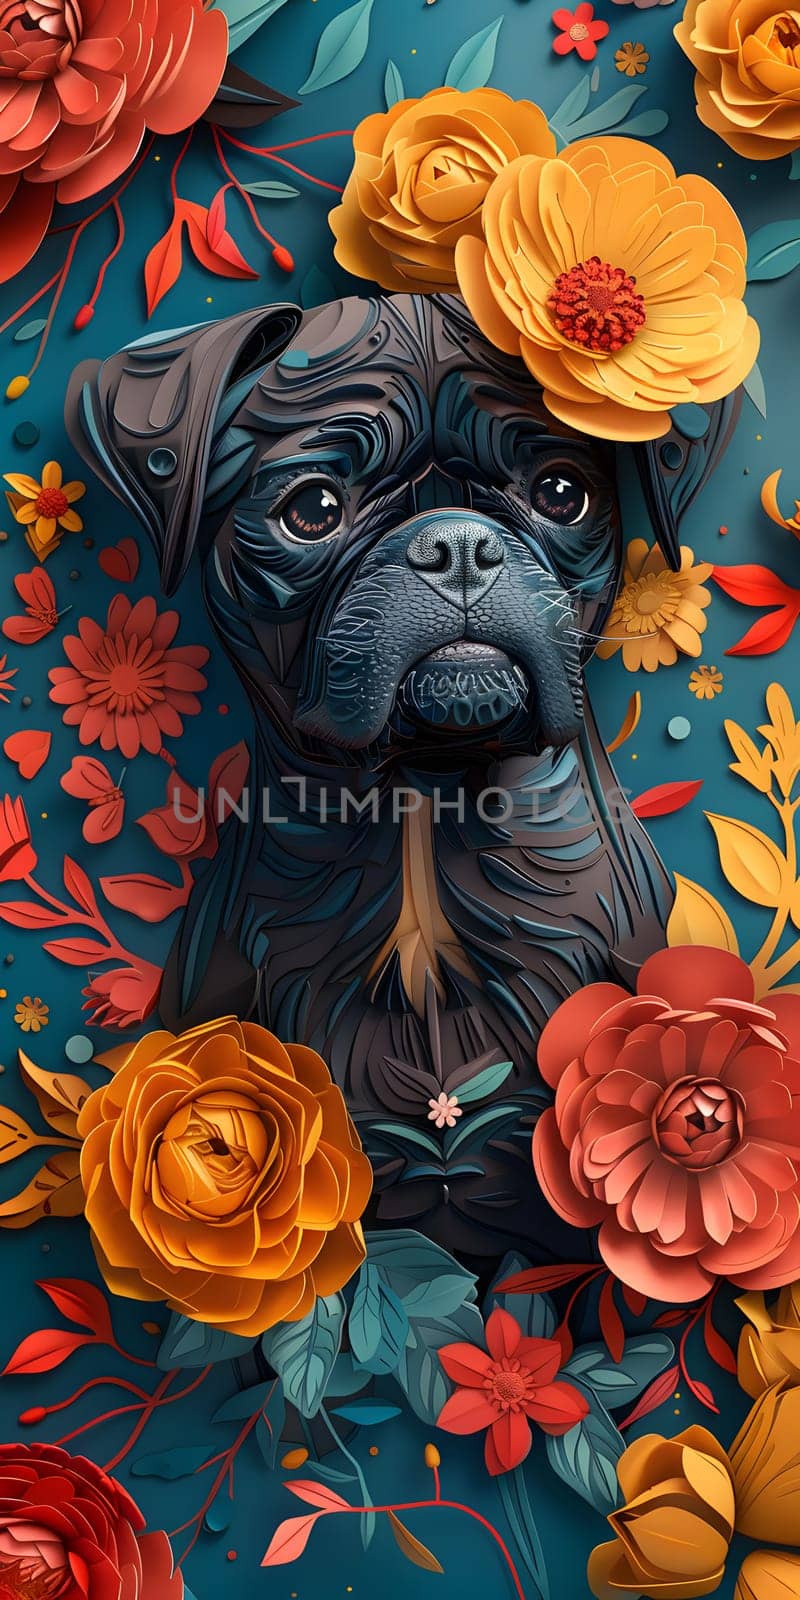 A Fawn Pug dog surrounded by orange flowers on a blue background by Nadtochiy